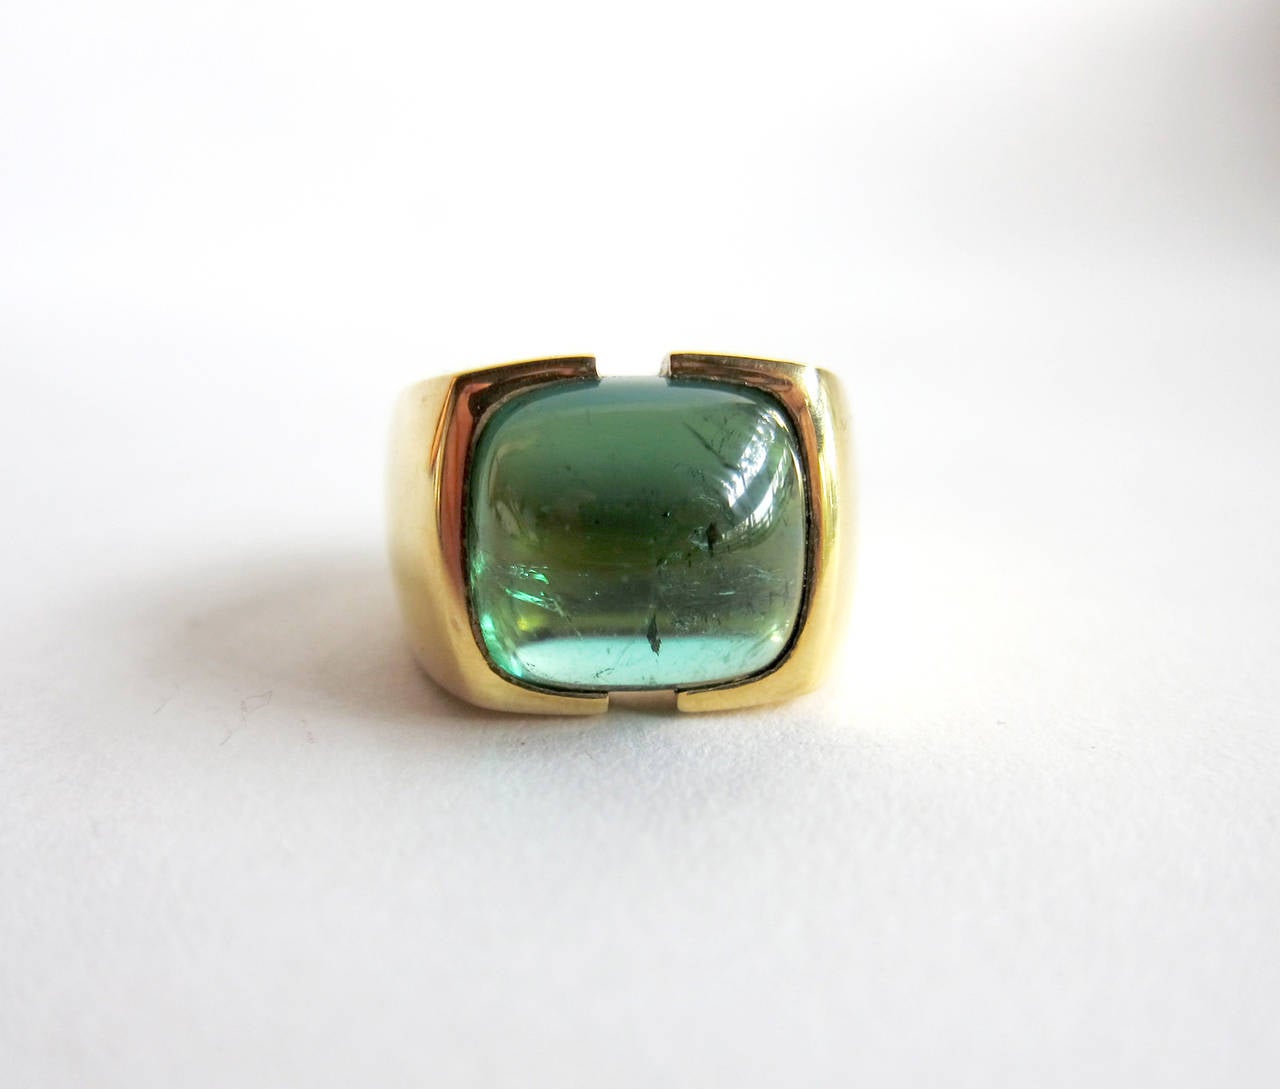 An 18K gold mounting centering a large cushion-shape green tourmaline cabochon ring, circa 1970s. Ring is signed 18k and is a size 9 3/4 and , suitable for a man or woman.  Weighs a hefty 34.3 grams.  Excellent condition with natural inclusions in